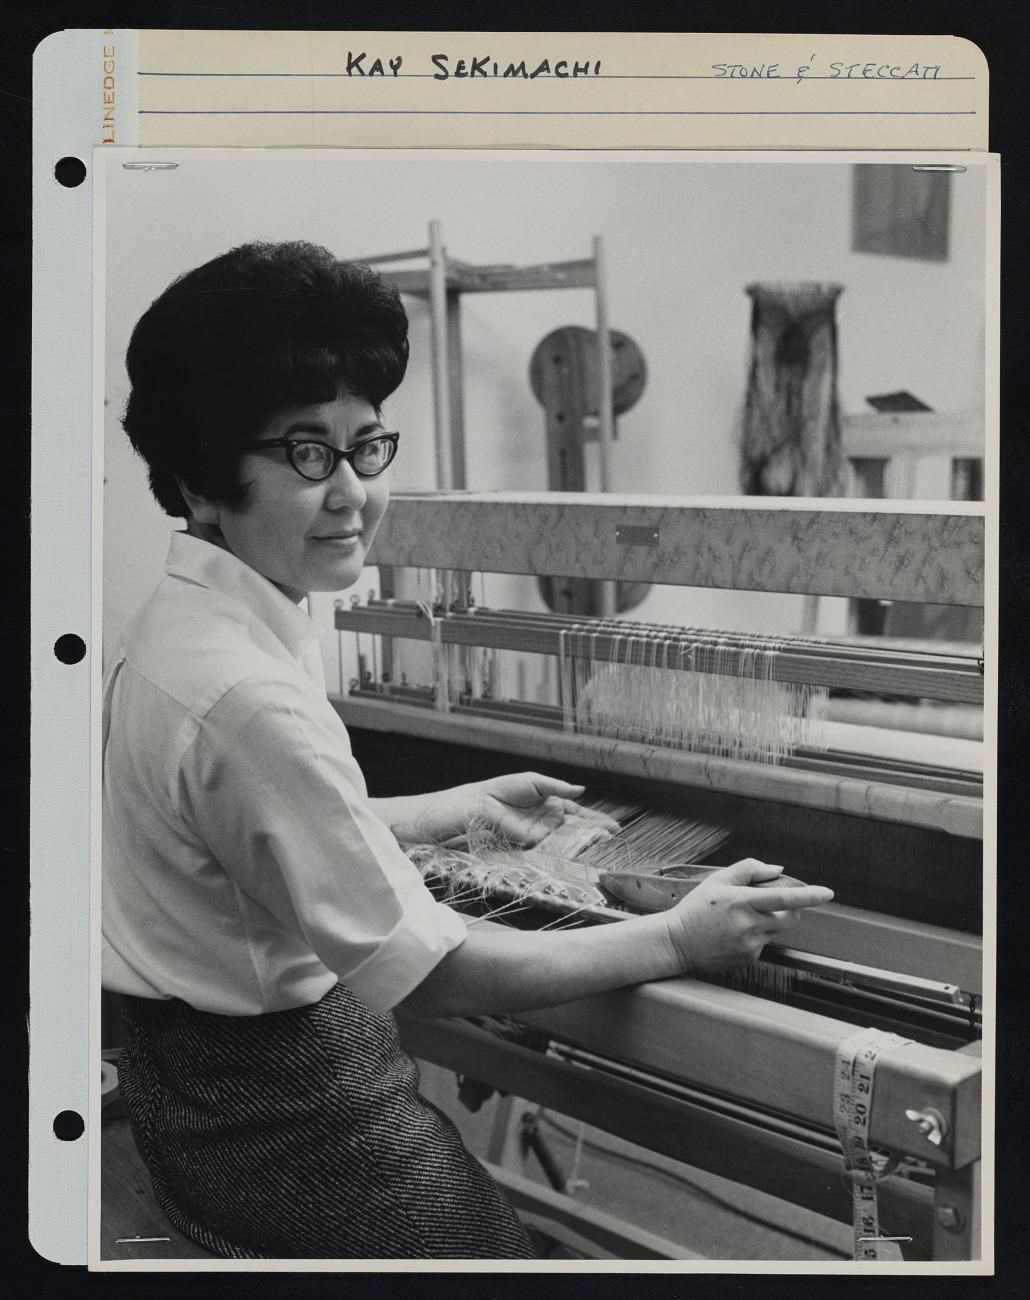 Black and white image of a woman sitting at a loom, looking at the camera